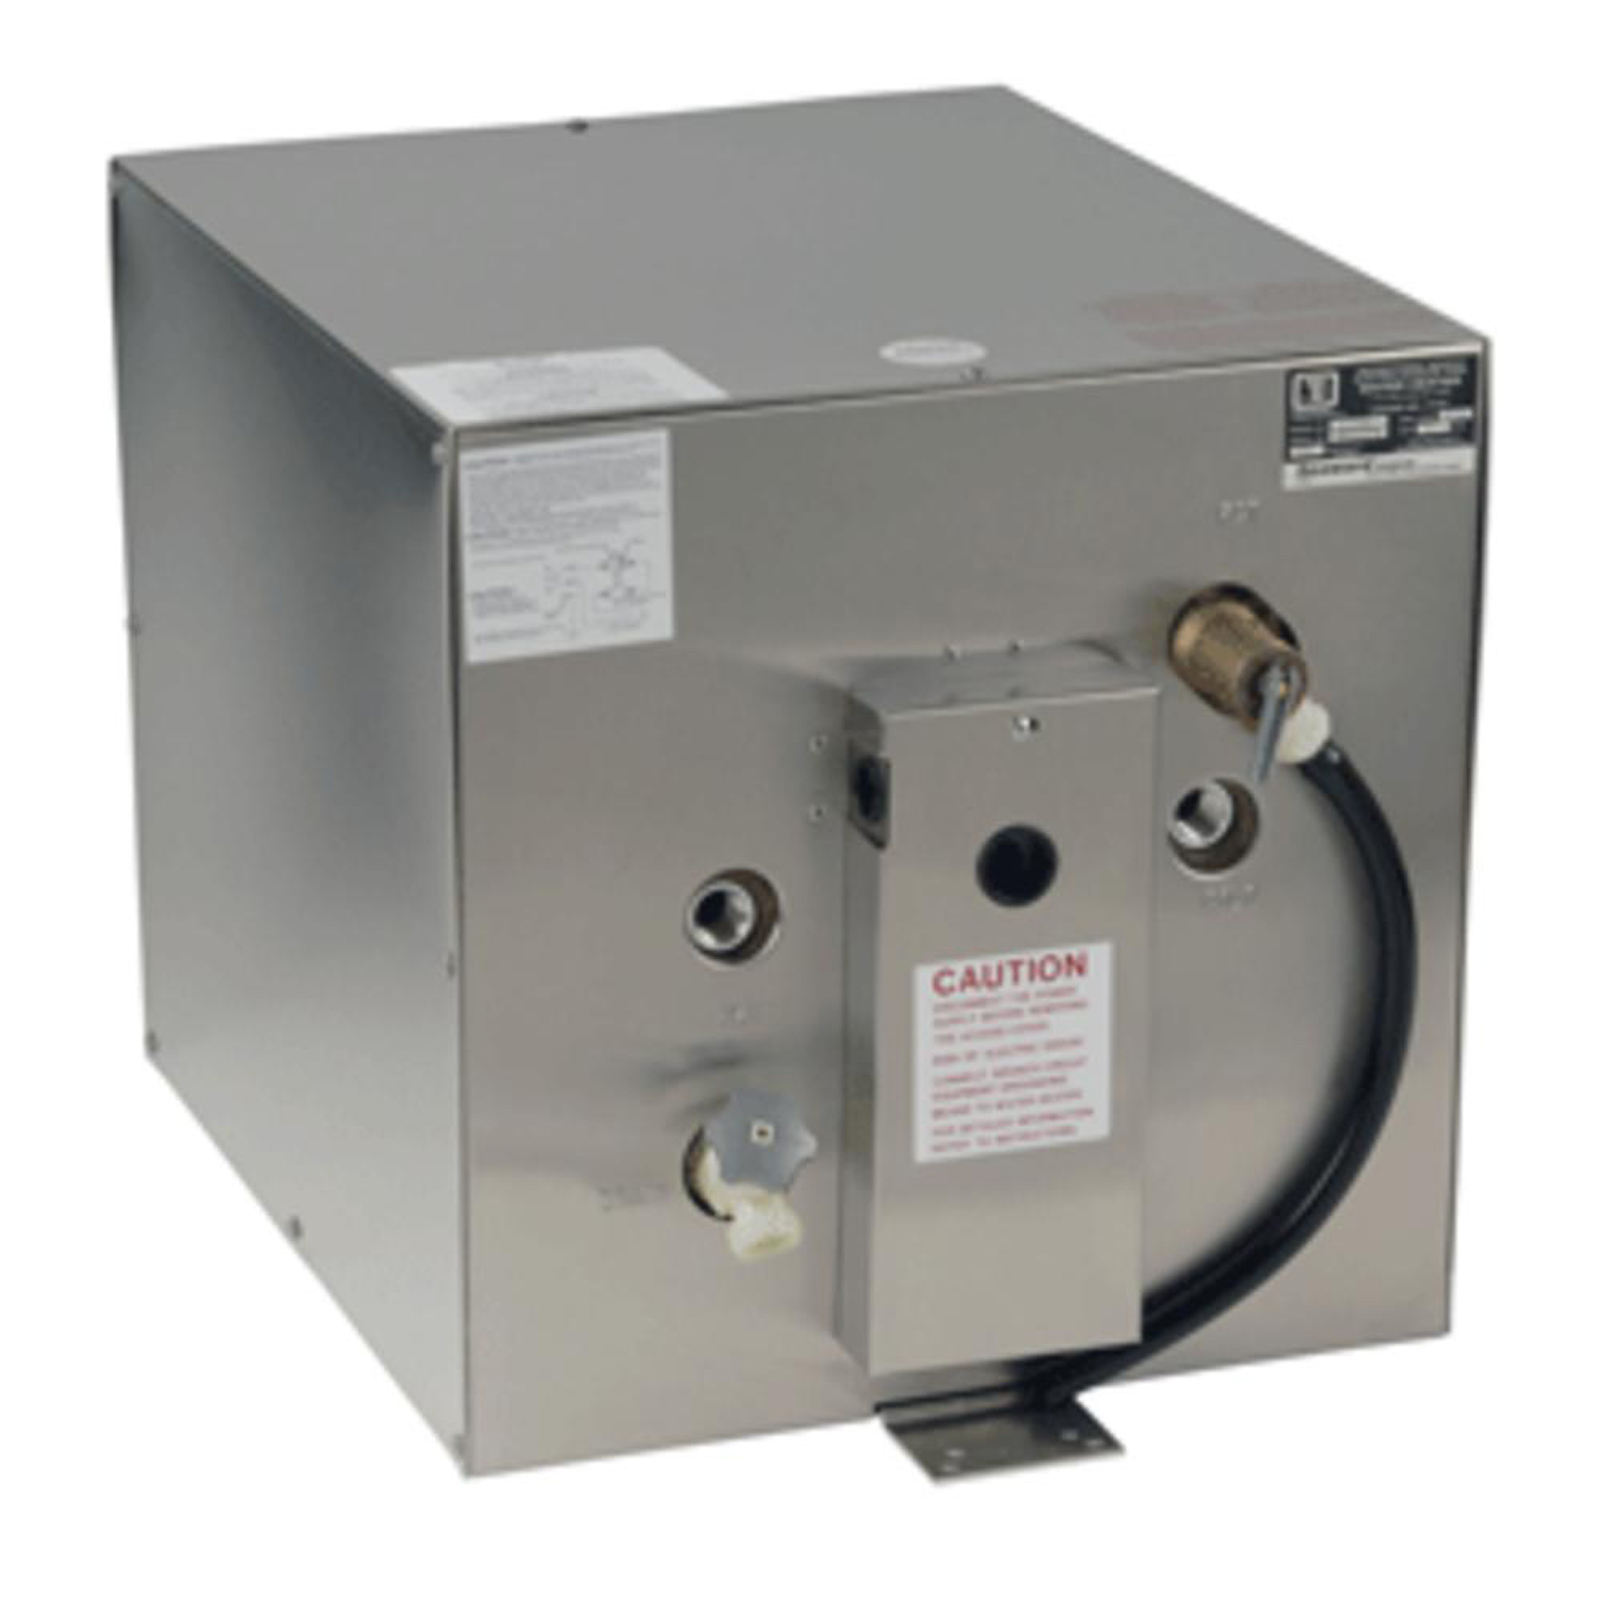 Whale Marine S1200  Seaward Water Heater With Rear Heat Exchanger - Stainless Steel